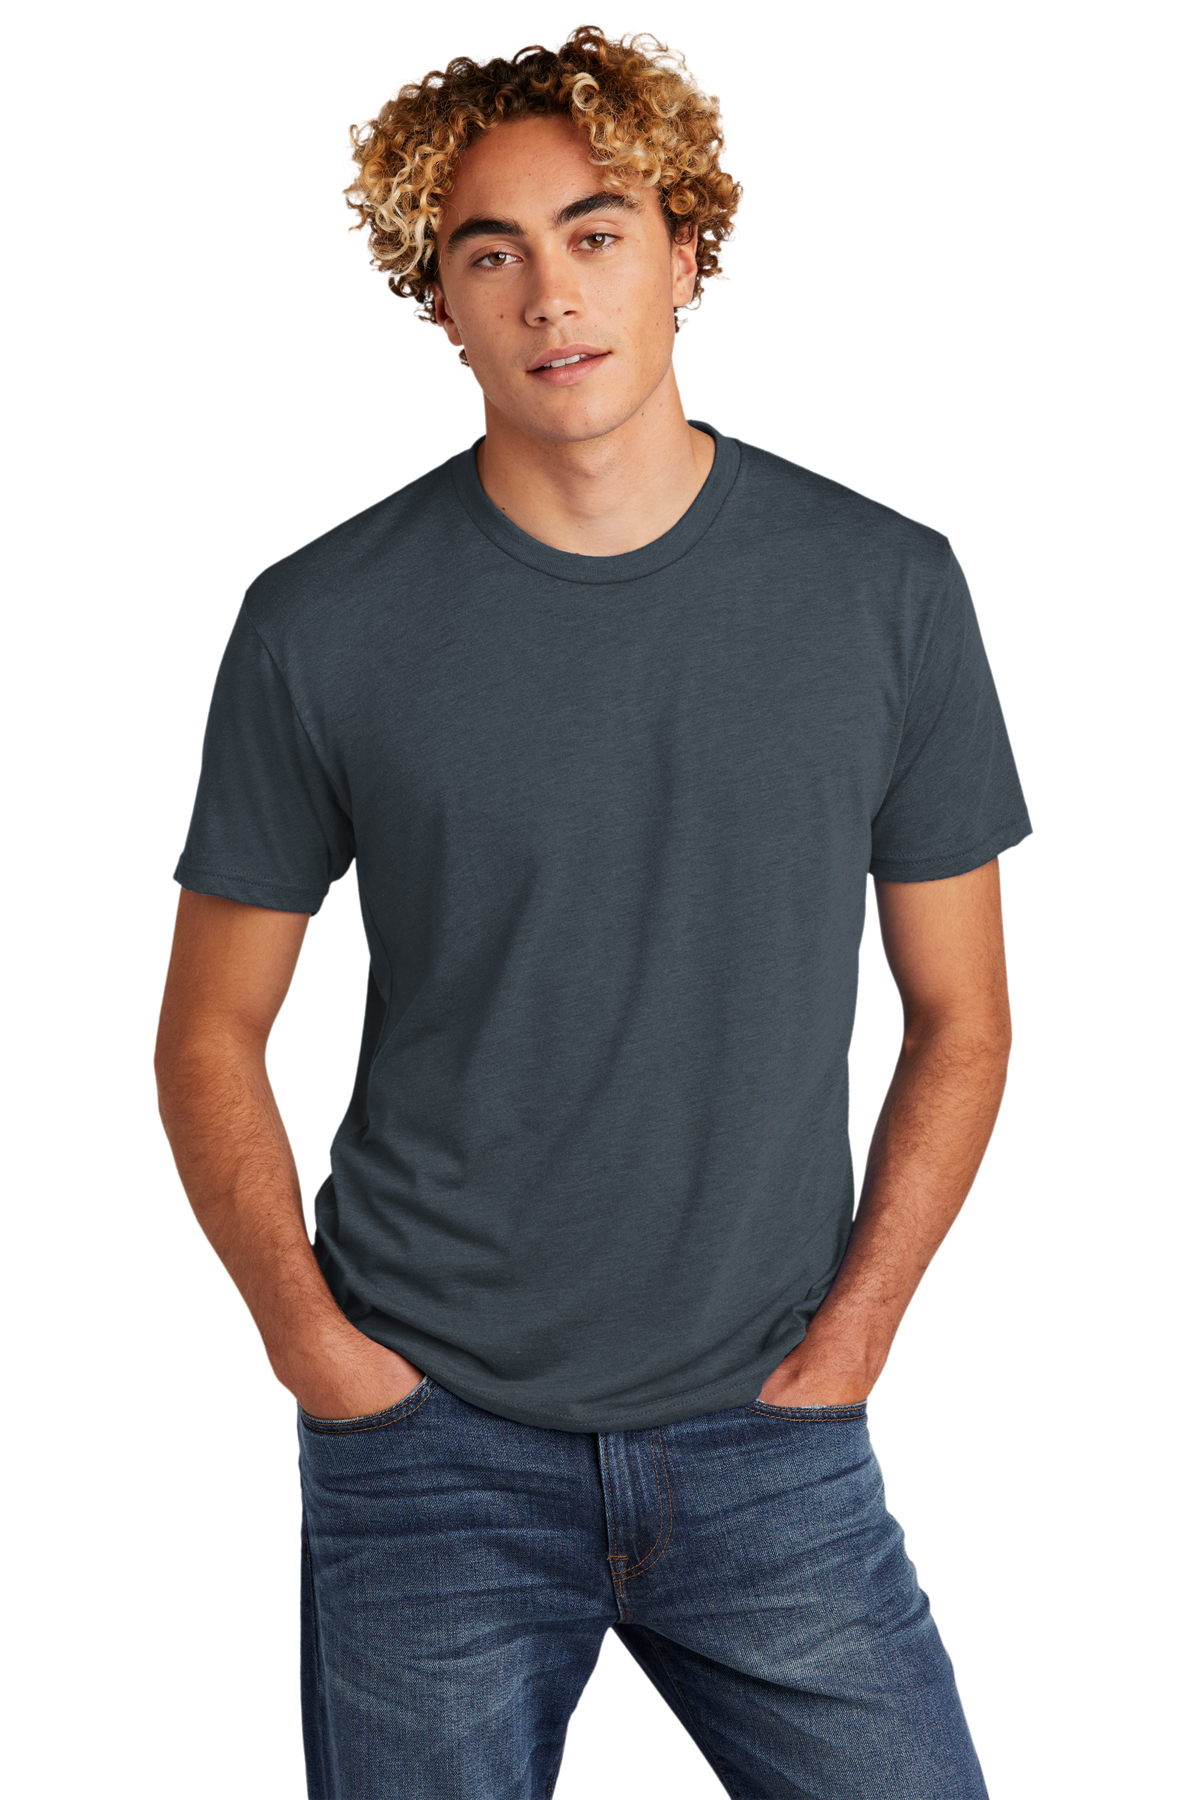 Next Level Apparel Unisex Tri-Blend Tee | Product | Company Casuals